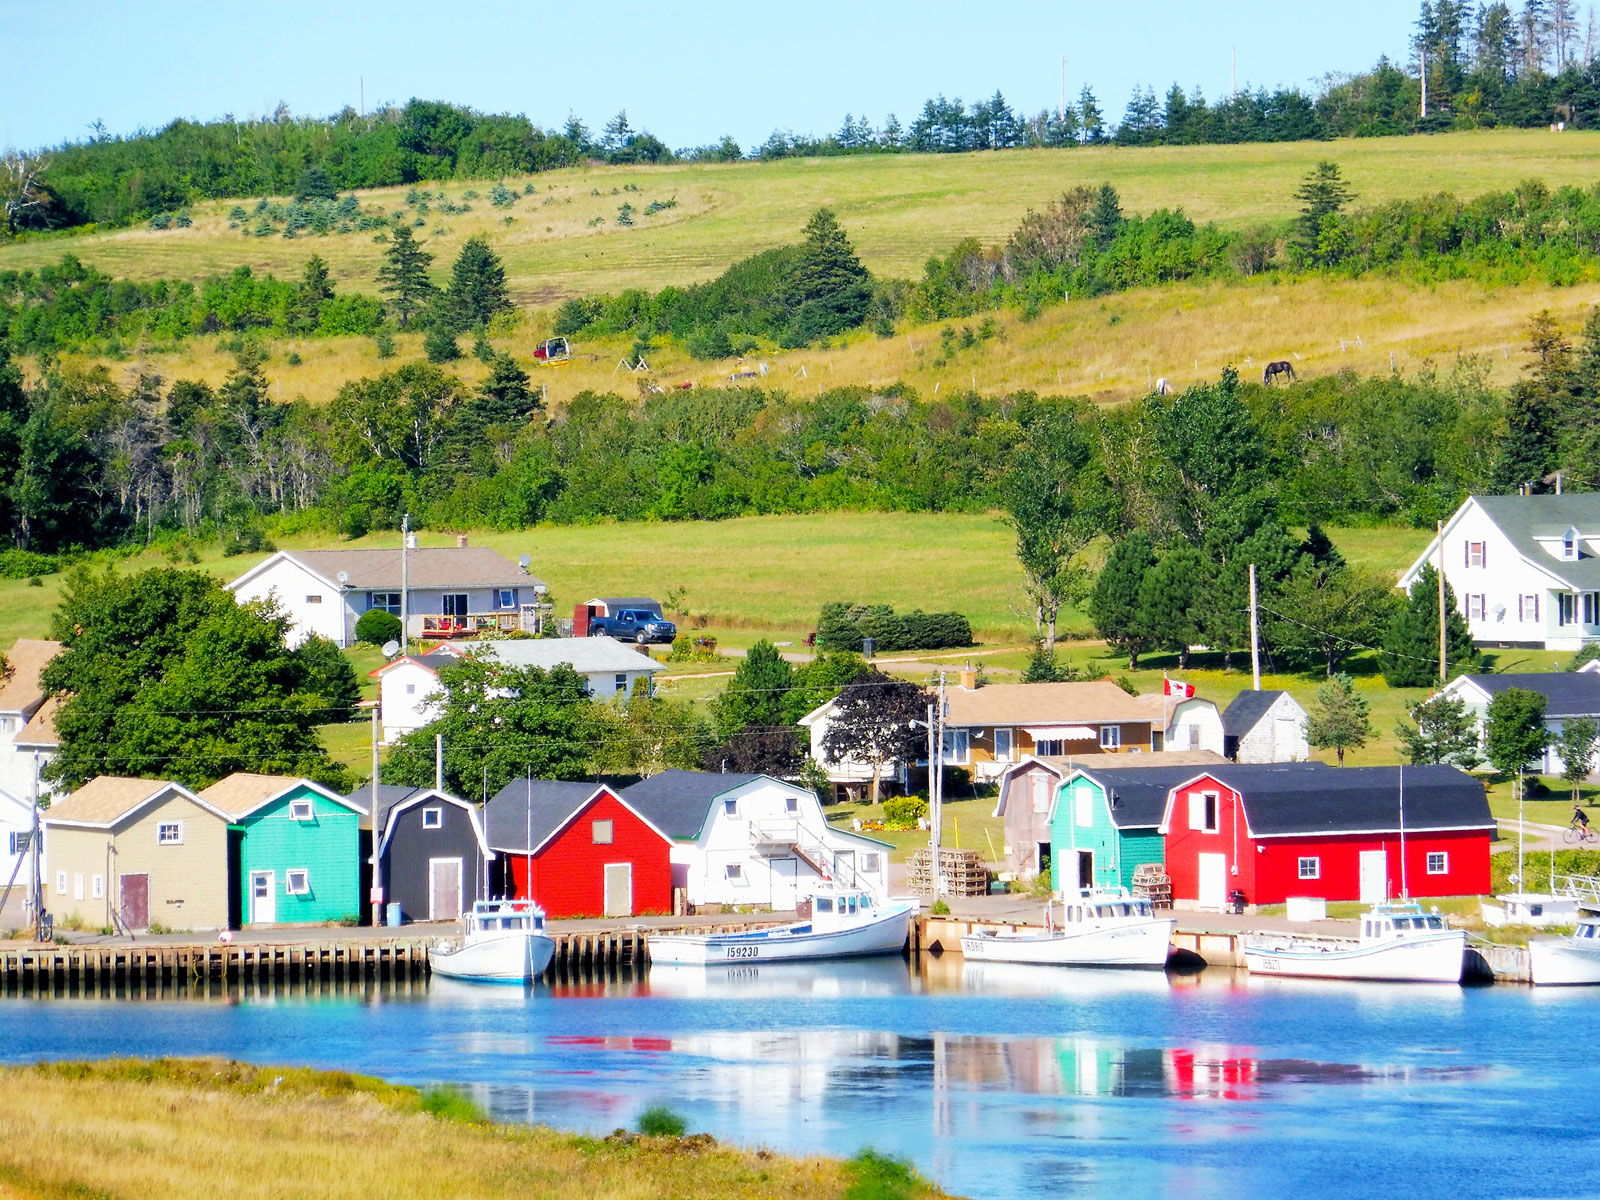 Picturesque Prince Edward Island